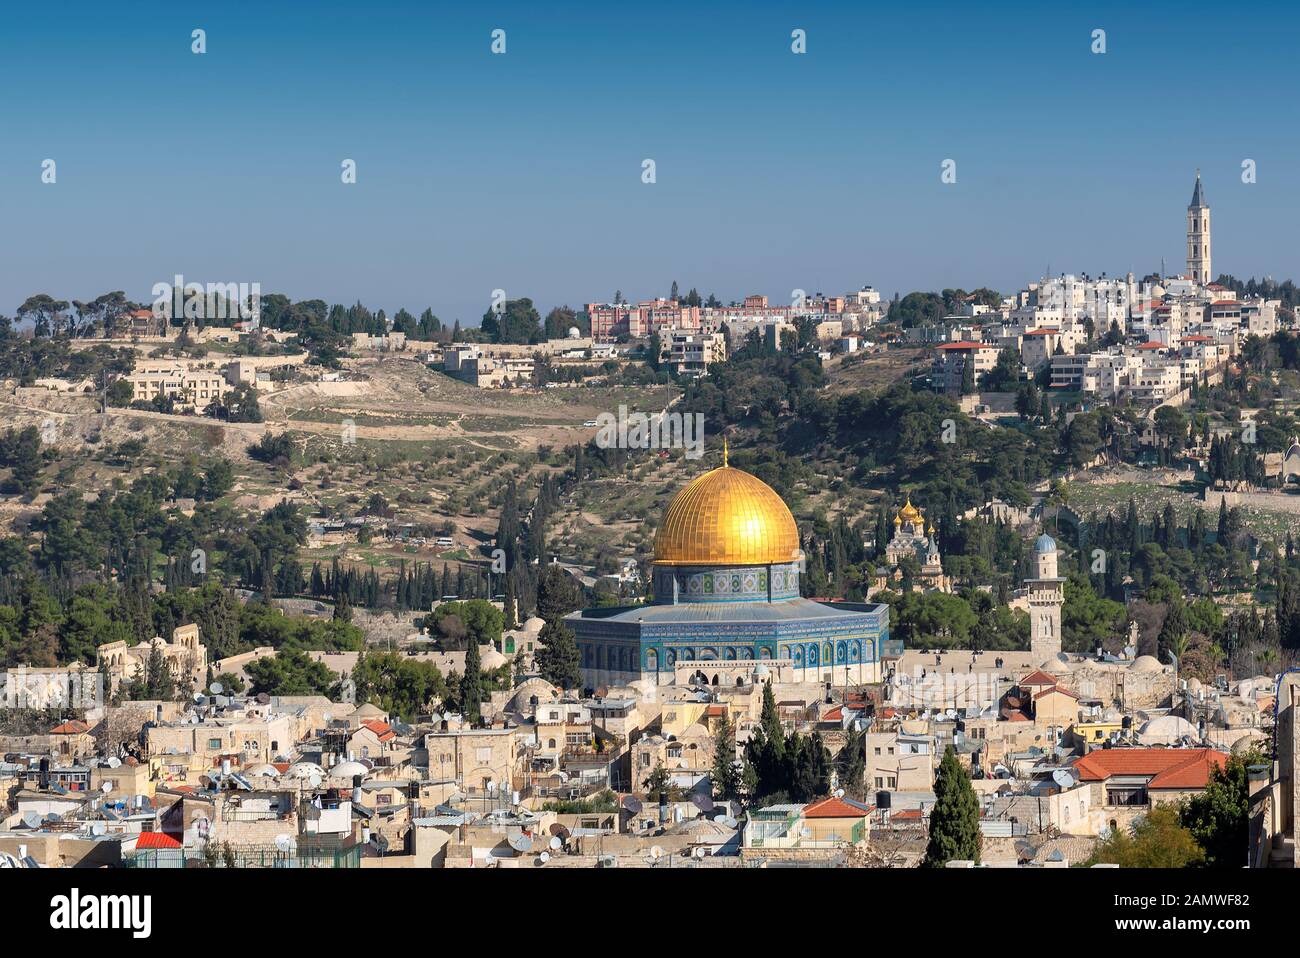 Dome of the Rock in Temple Mount in Jerusalem Old City, Israel. Stock Photo